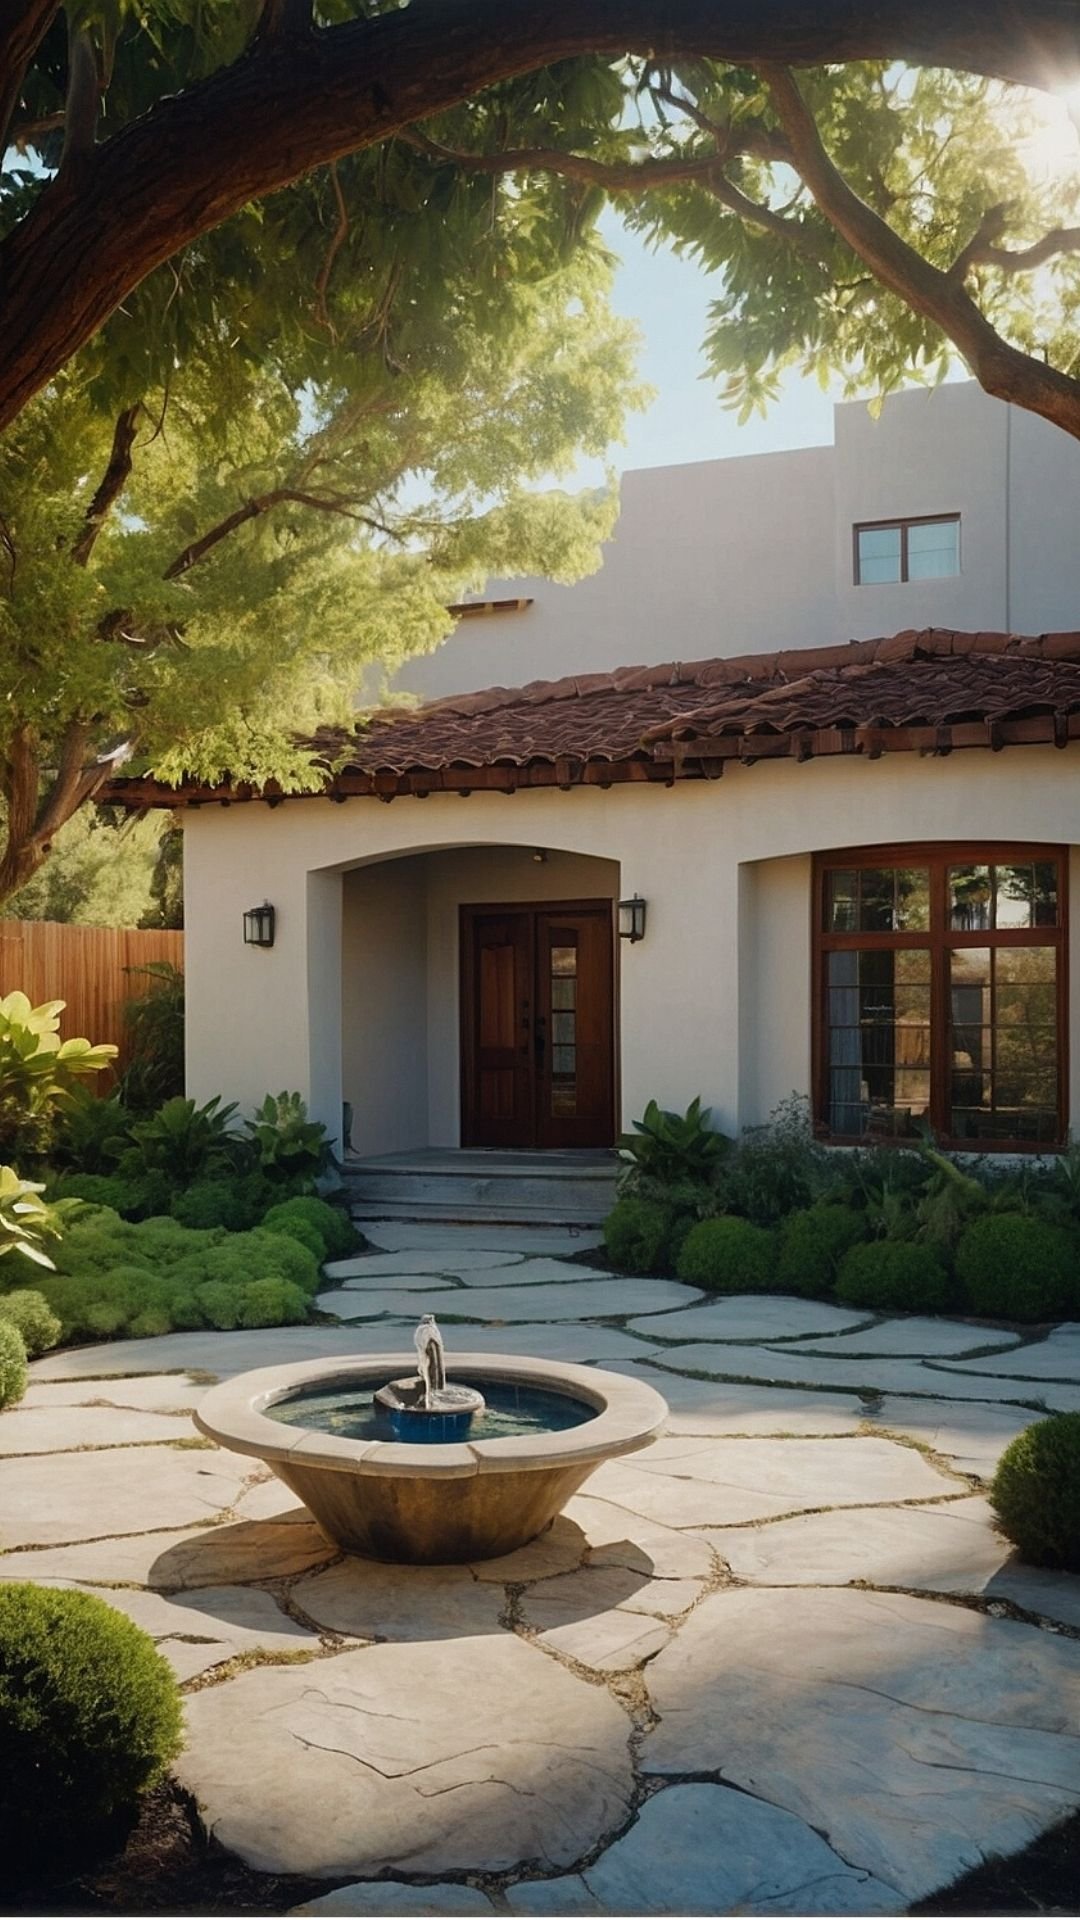 Tranquil Courtyard with Central Fountain – Timeless Mediterranean Charm